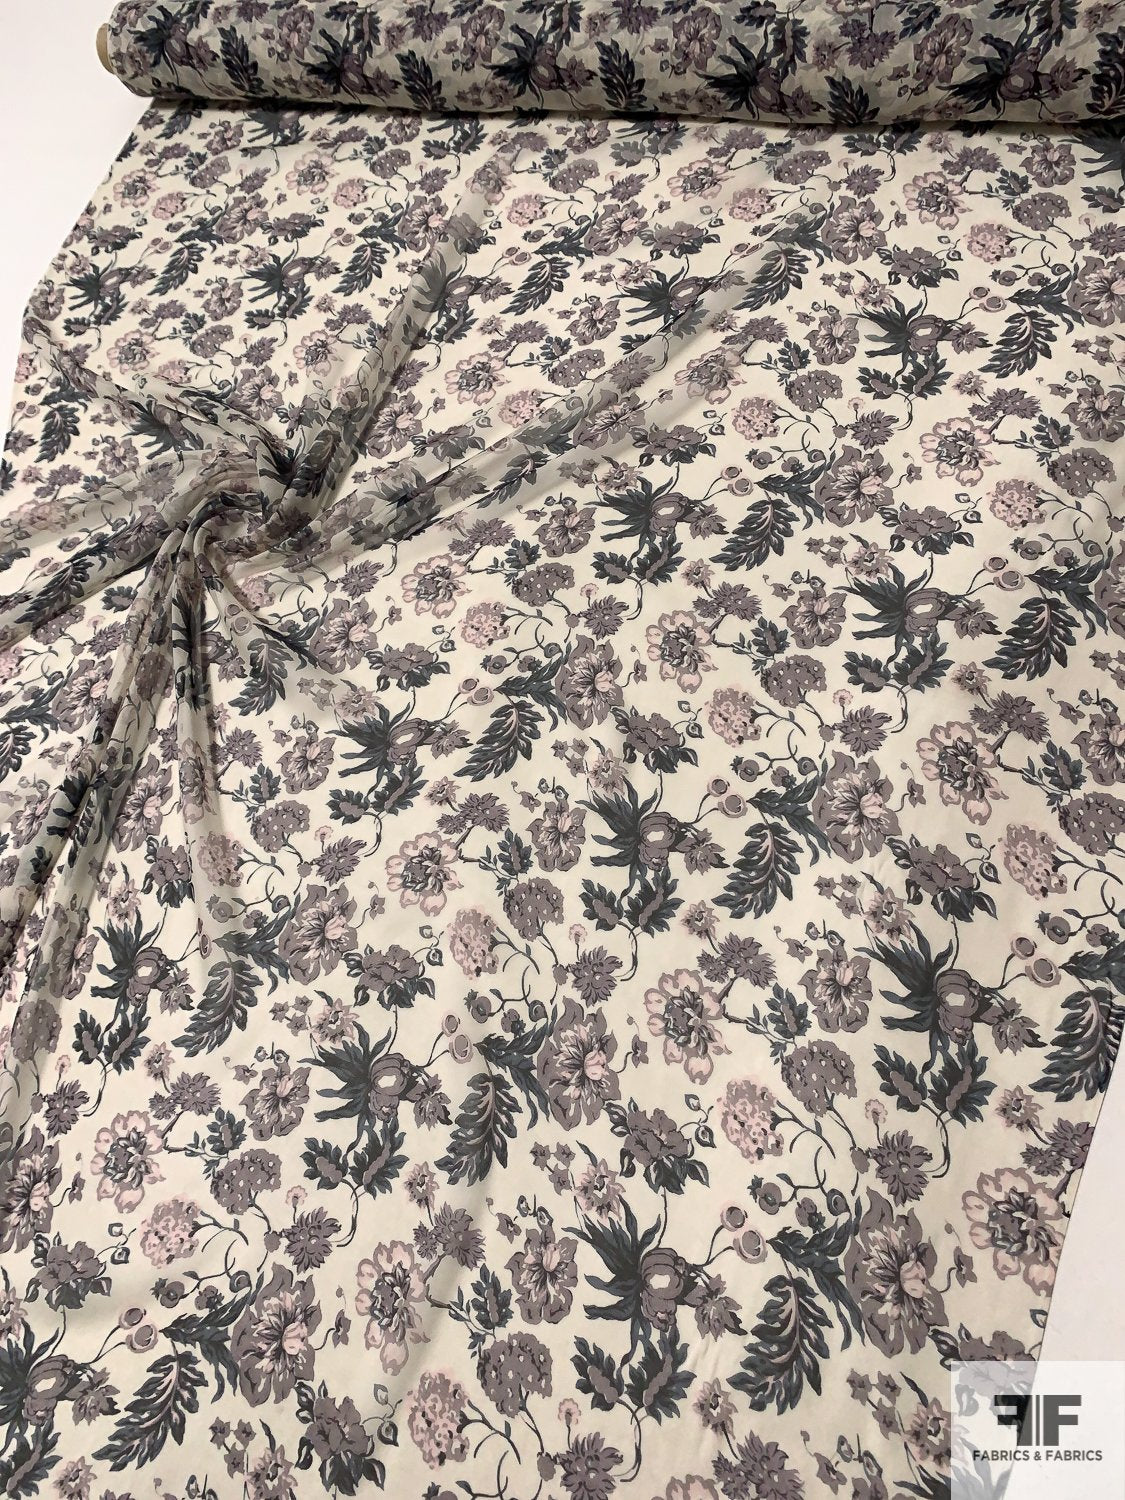 Intricate Floral Printed Silk Chiffon - Shades of Grey / Dusty Treal / Off-White